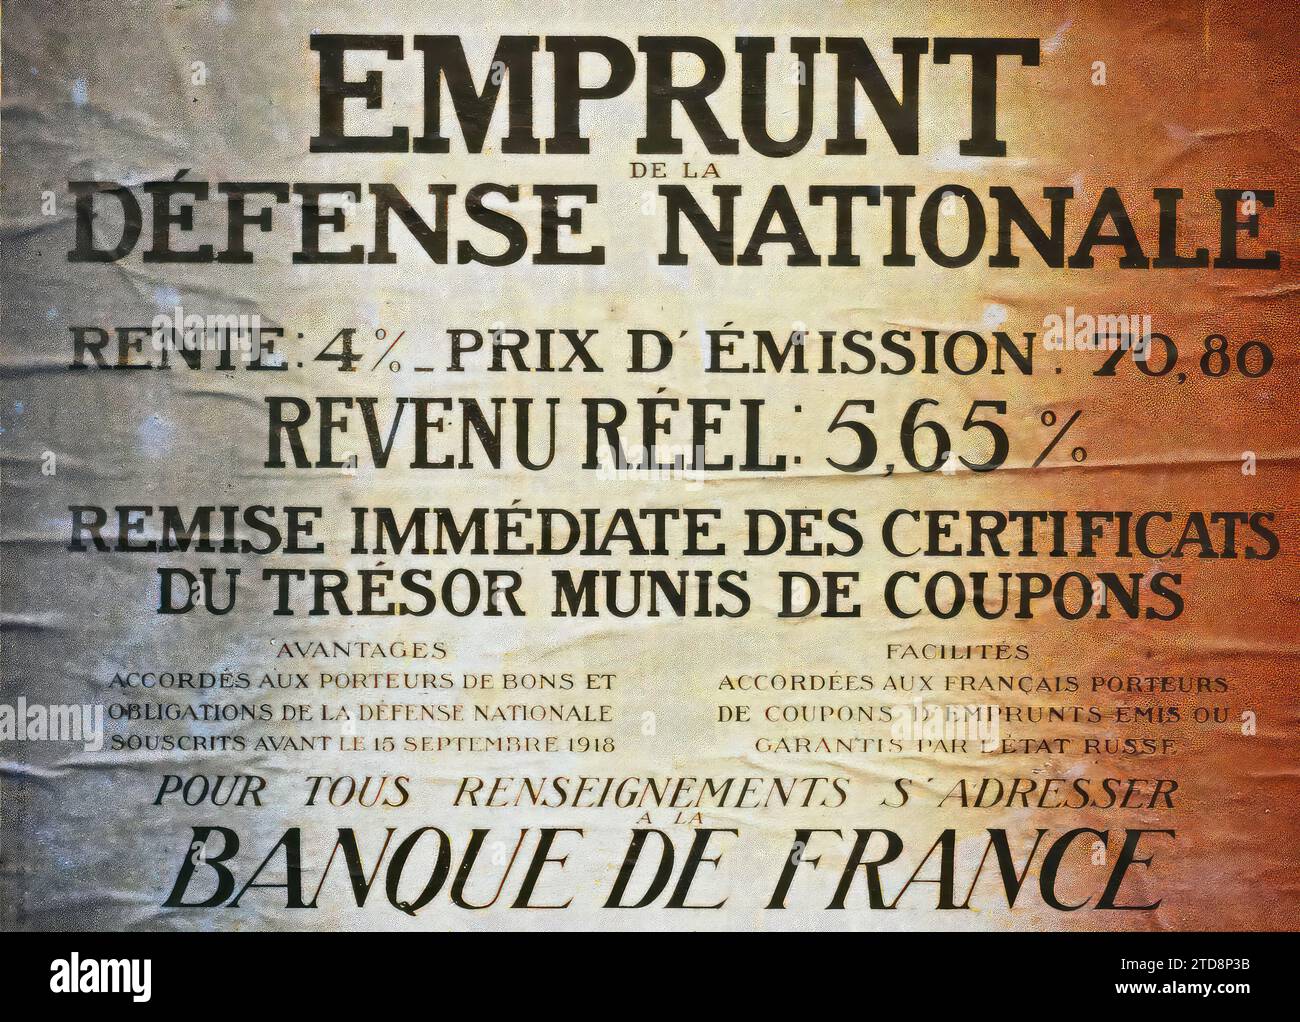 Paris, France Poster of the national loan, Bank of France, Economic activity, Registration, information, First World War, Loan, Bank, finances, Poster, War effort, war work, France, Paris, Poster of the loan Bank of France, Paris, 18/10/1918 - 18/10/1918, Léon, Auguste, photographer, Autochrome, photo, Glass, Autochrome, photo, Positive, Horizontal, Size 9 x 12 cm Stock Photo